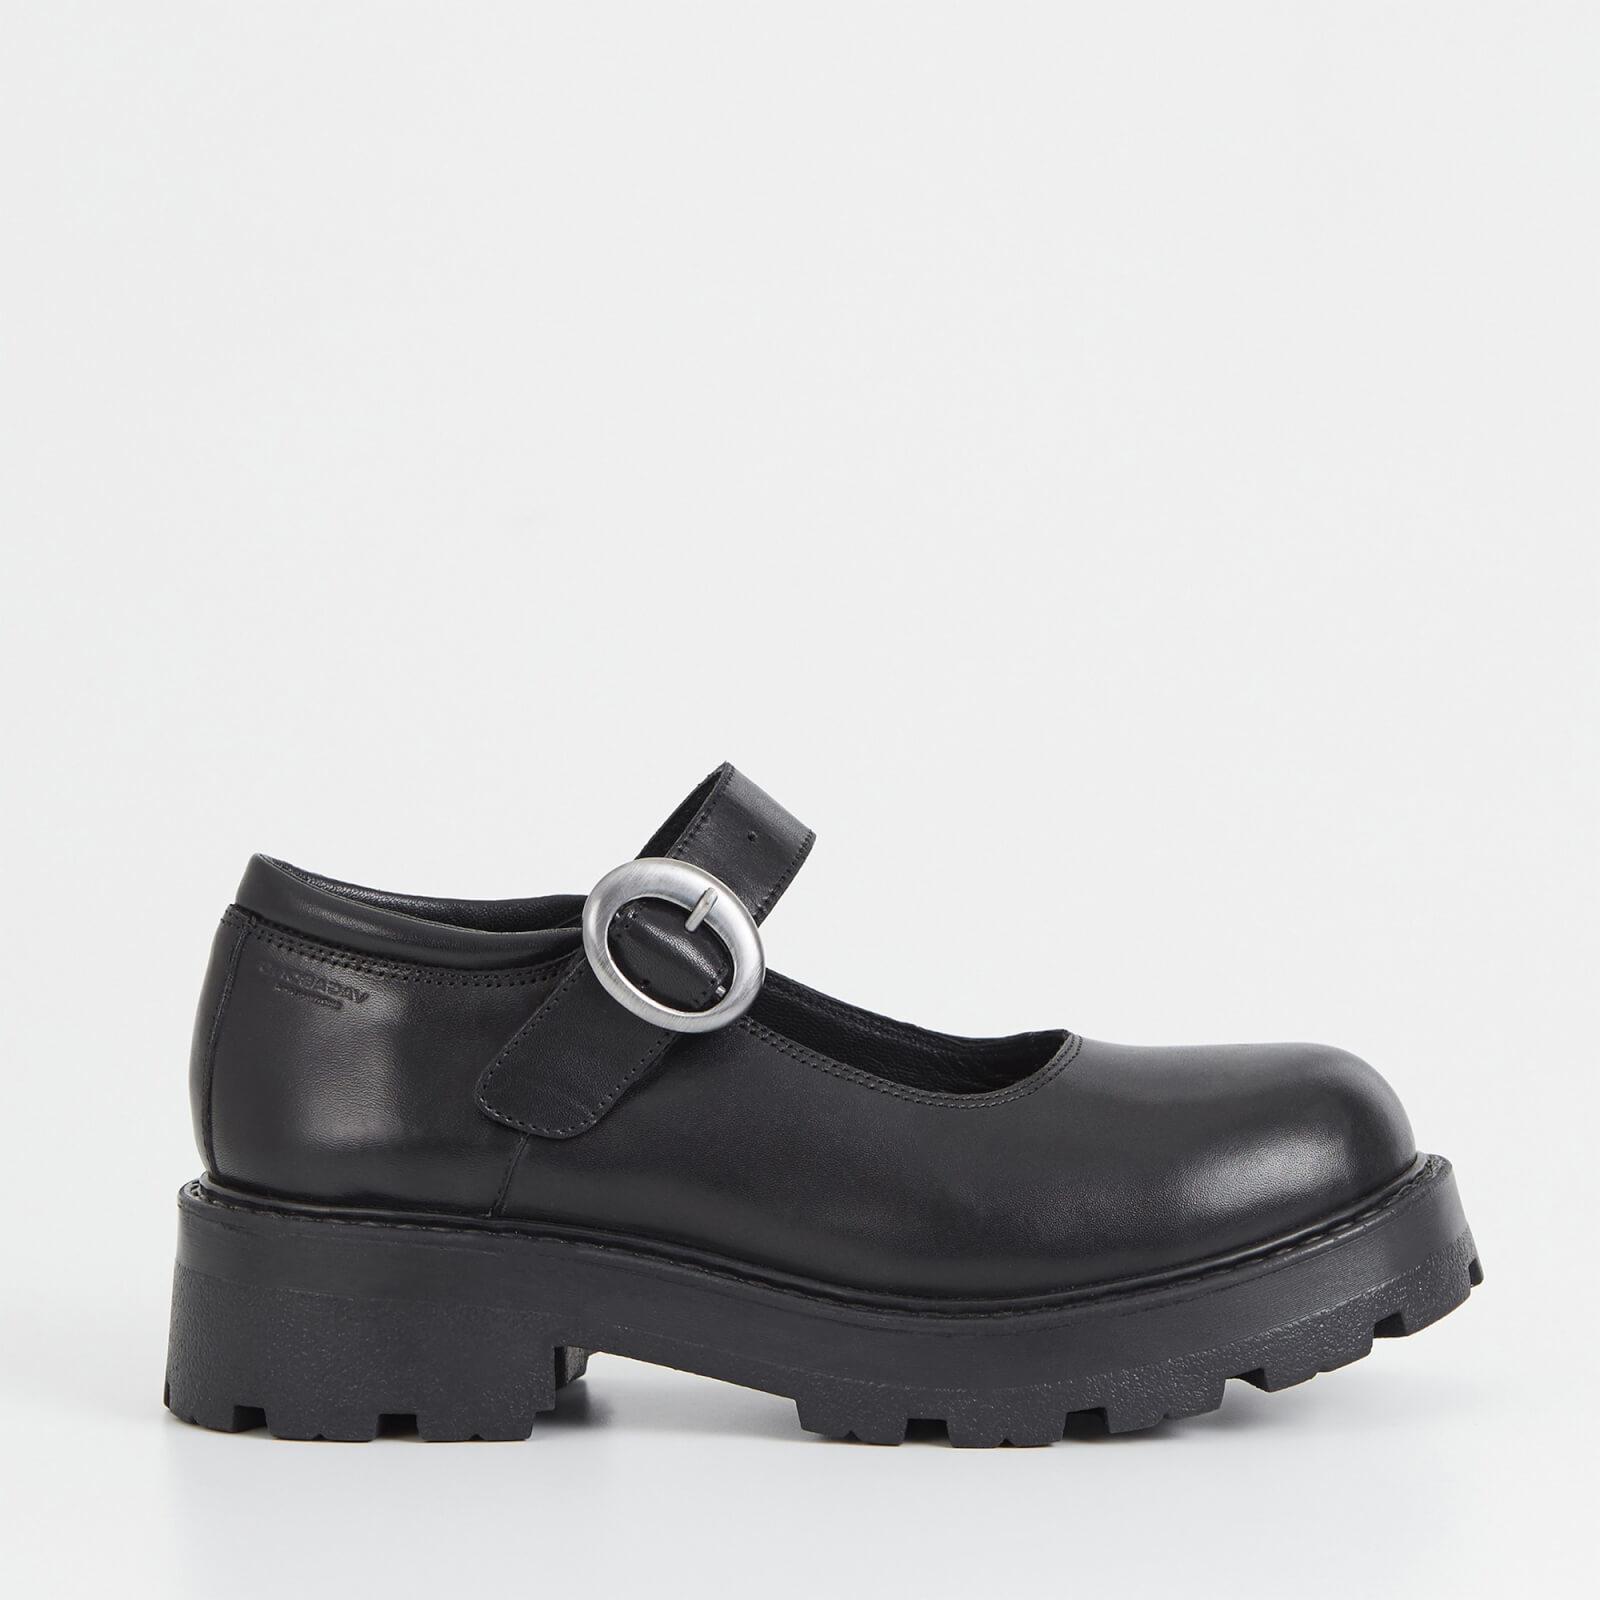 Vagabond Shoemakers Cosmo 2.0 Leather Mary Jane Shoes in Black | Lyst